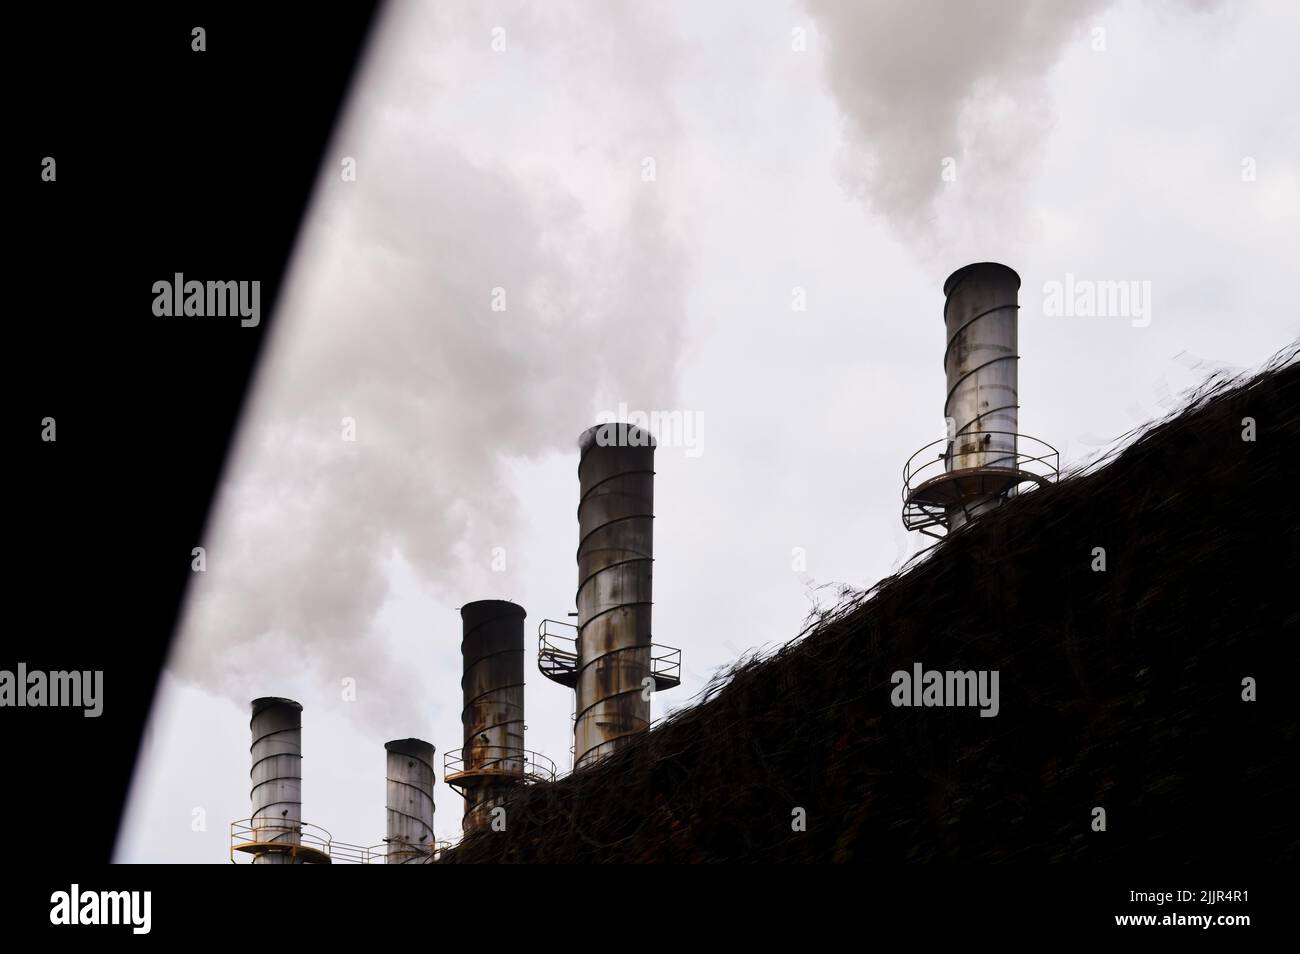 industrial smokestacks belching out smoke polluting behind a fence Stock Photo